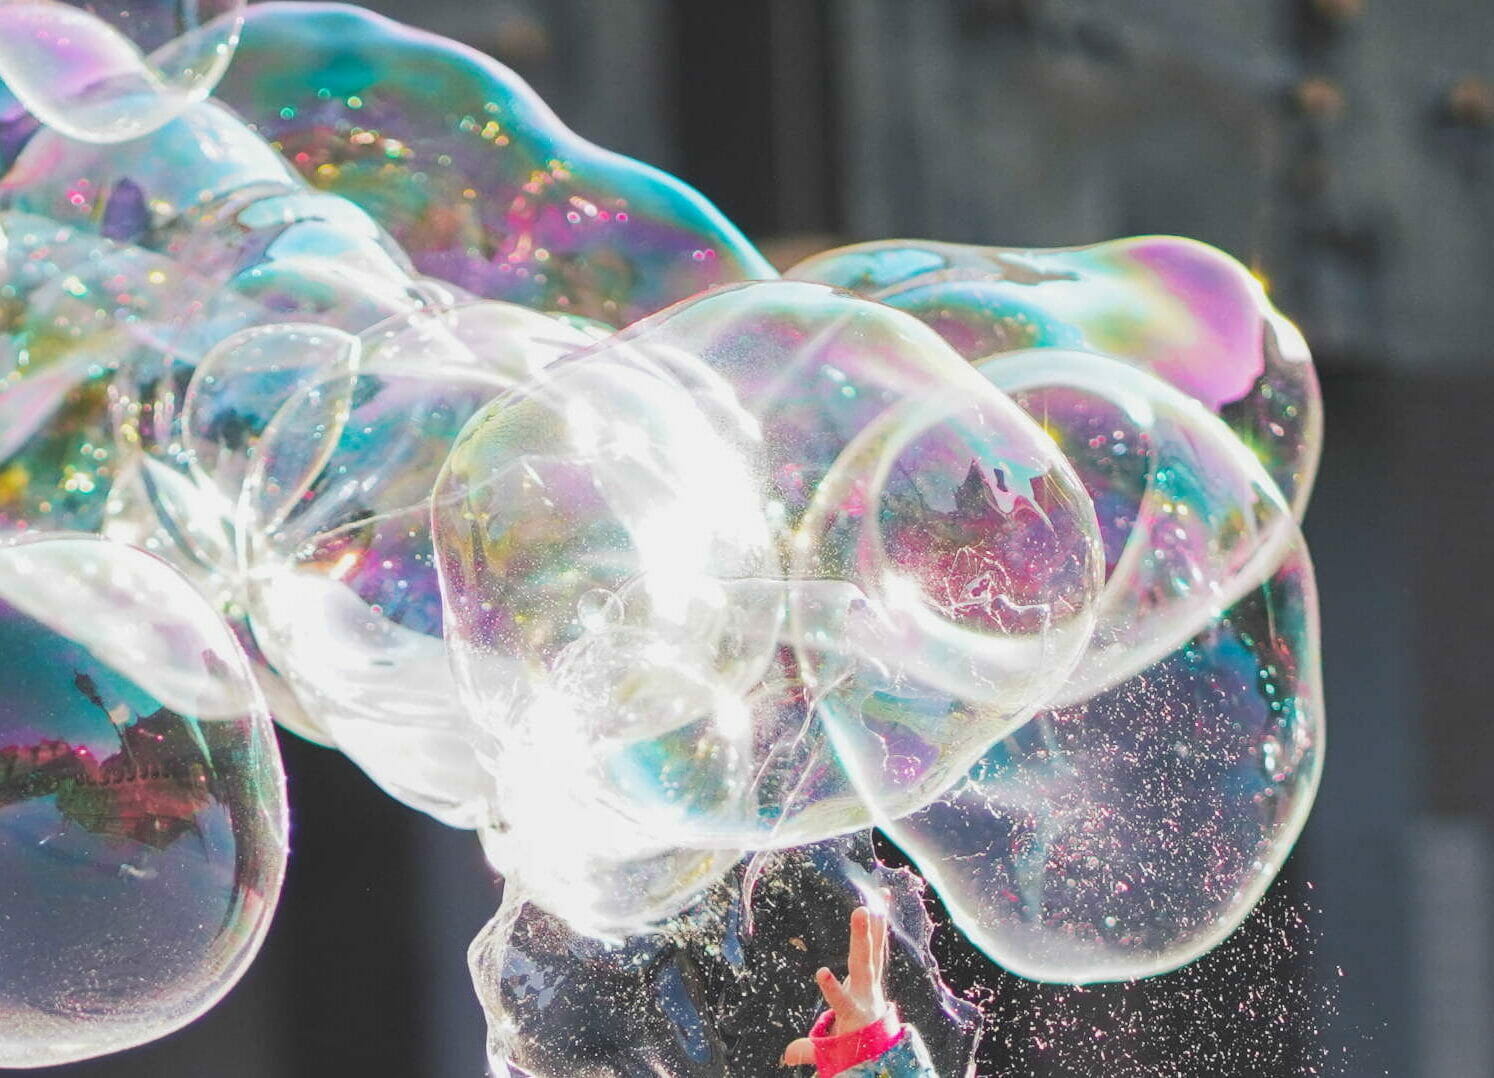 Soap bubbles as a metaphor for the similarities and differences between sociocracy and Holacracy. - Sociocracy For All